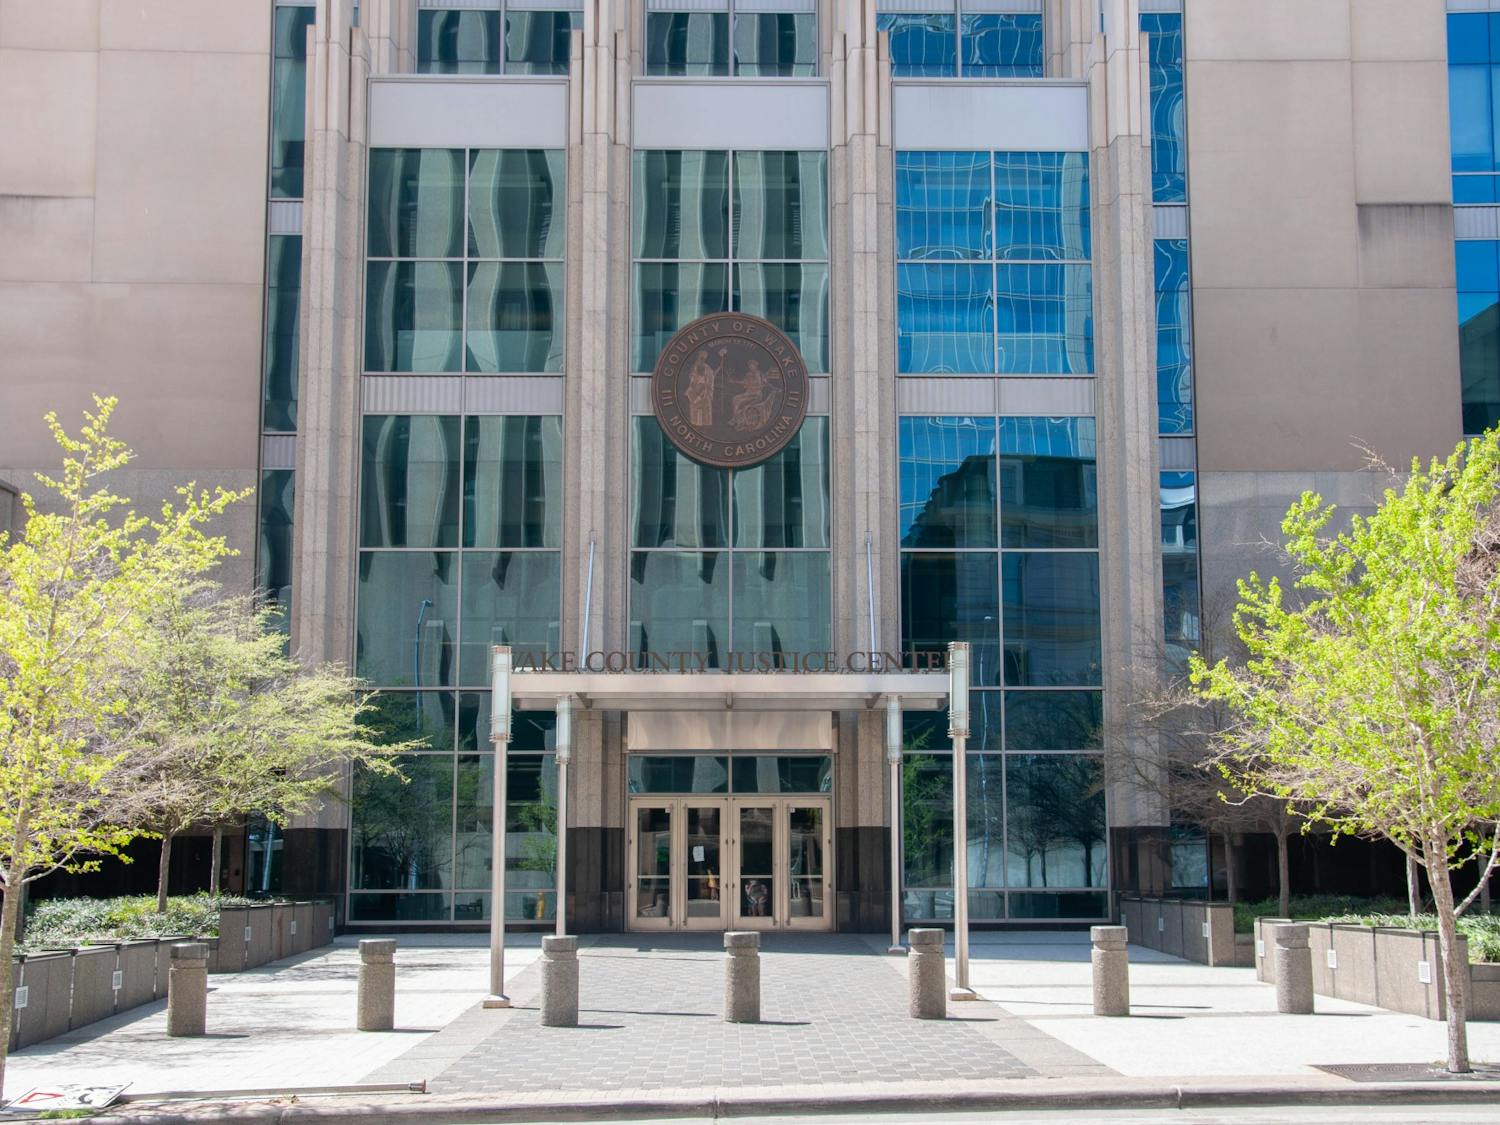 The Wake County Justice Center in downtown Raleigh, NC on April 4, 2021. A bill that was recently passed in the senate about raising the minimum age for juvenile delinquency from 6 to 10 now moves to the house.